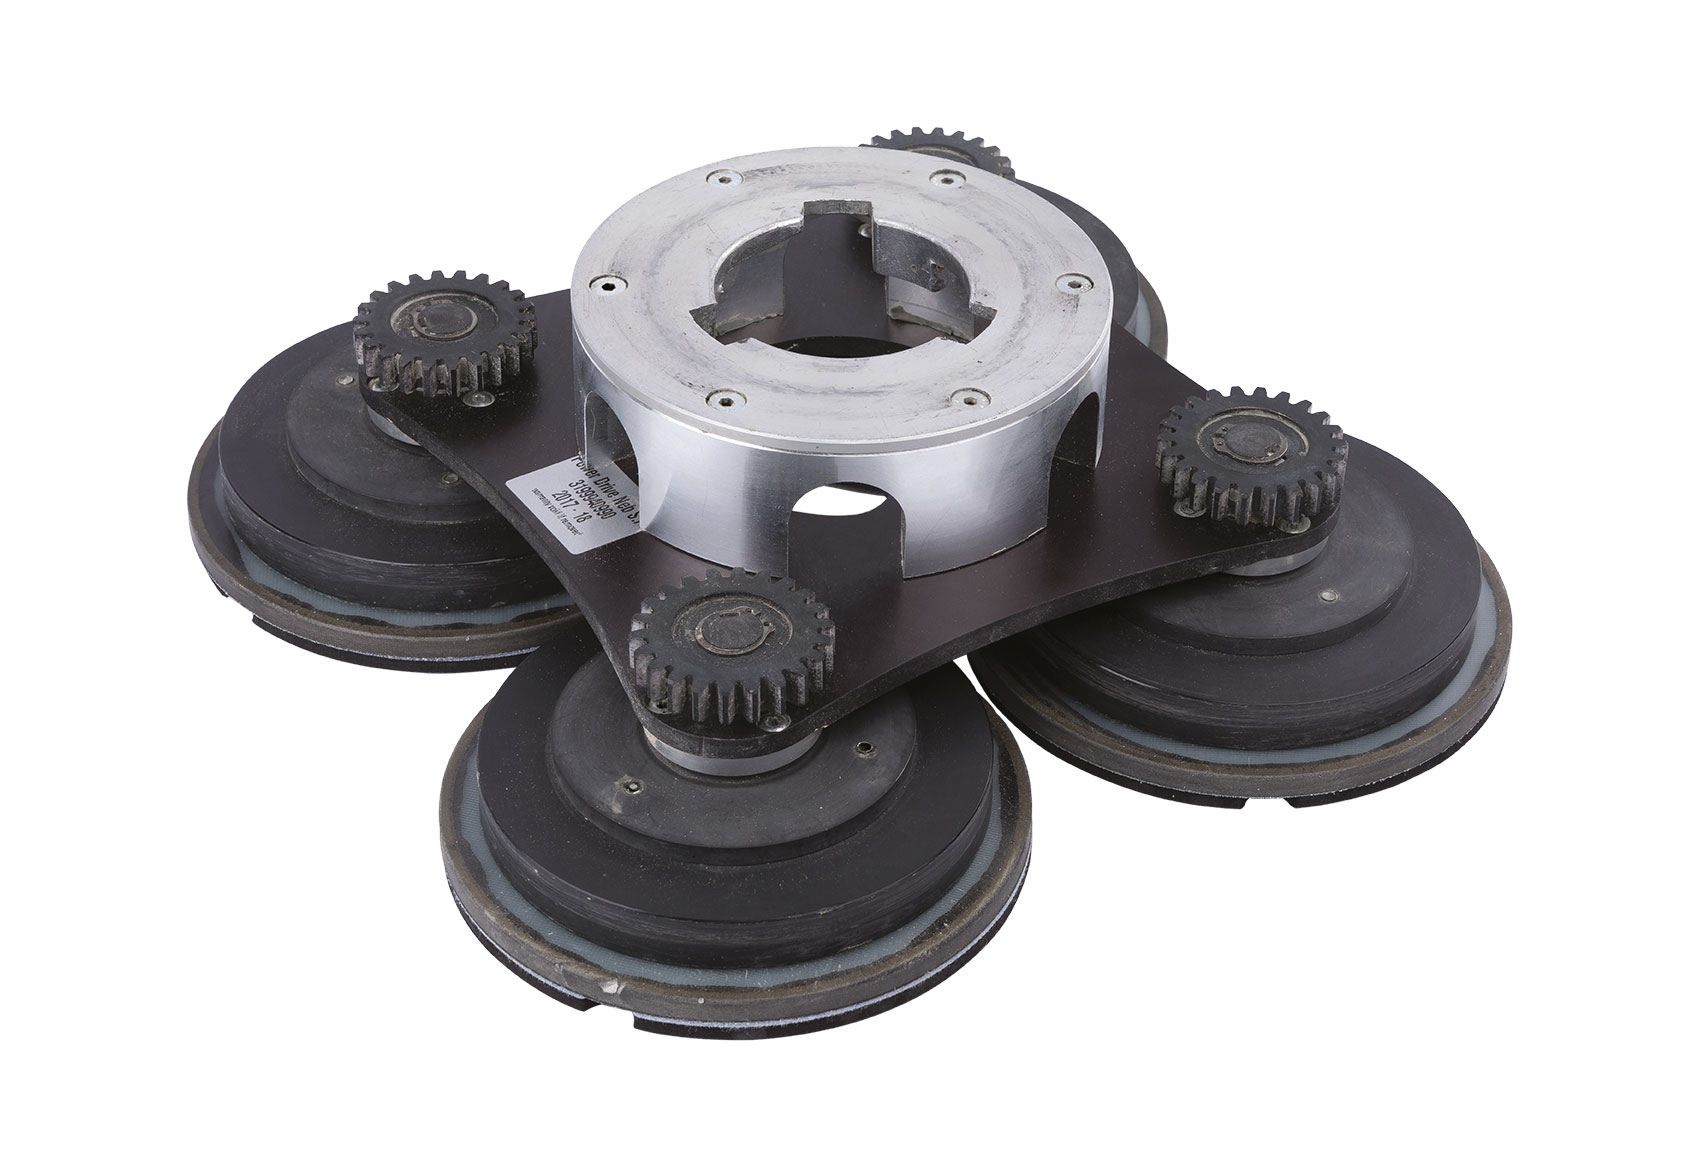 Bona PowerDrive four gear-driven cogs give unsurpassed power and direction-free sanding